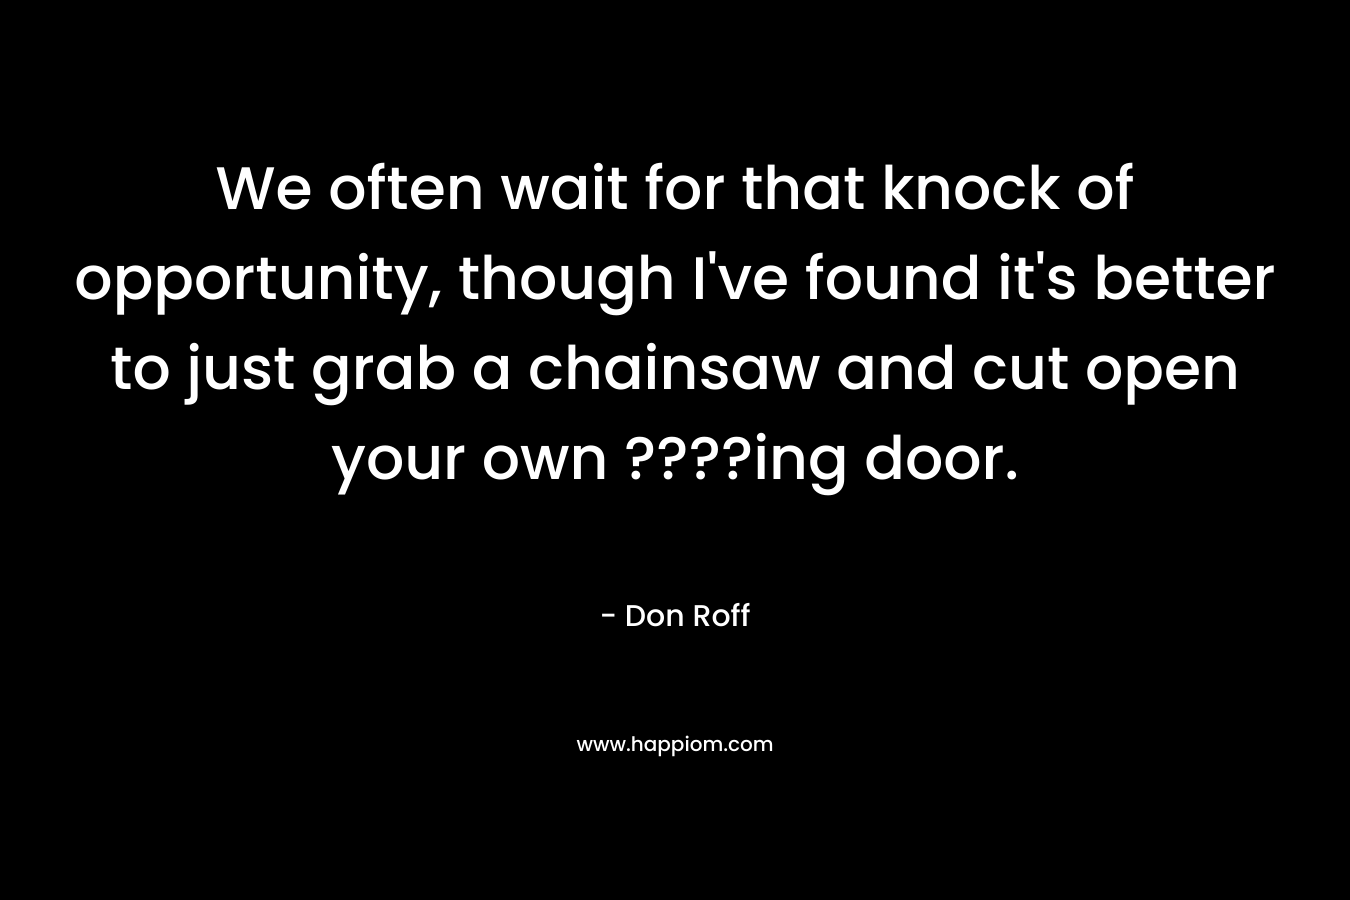 We often wait for that knock of opportunity, though I’ve found it’s better to just grab a chainsaw and cut open your own ????ing door. – Don Roff